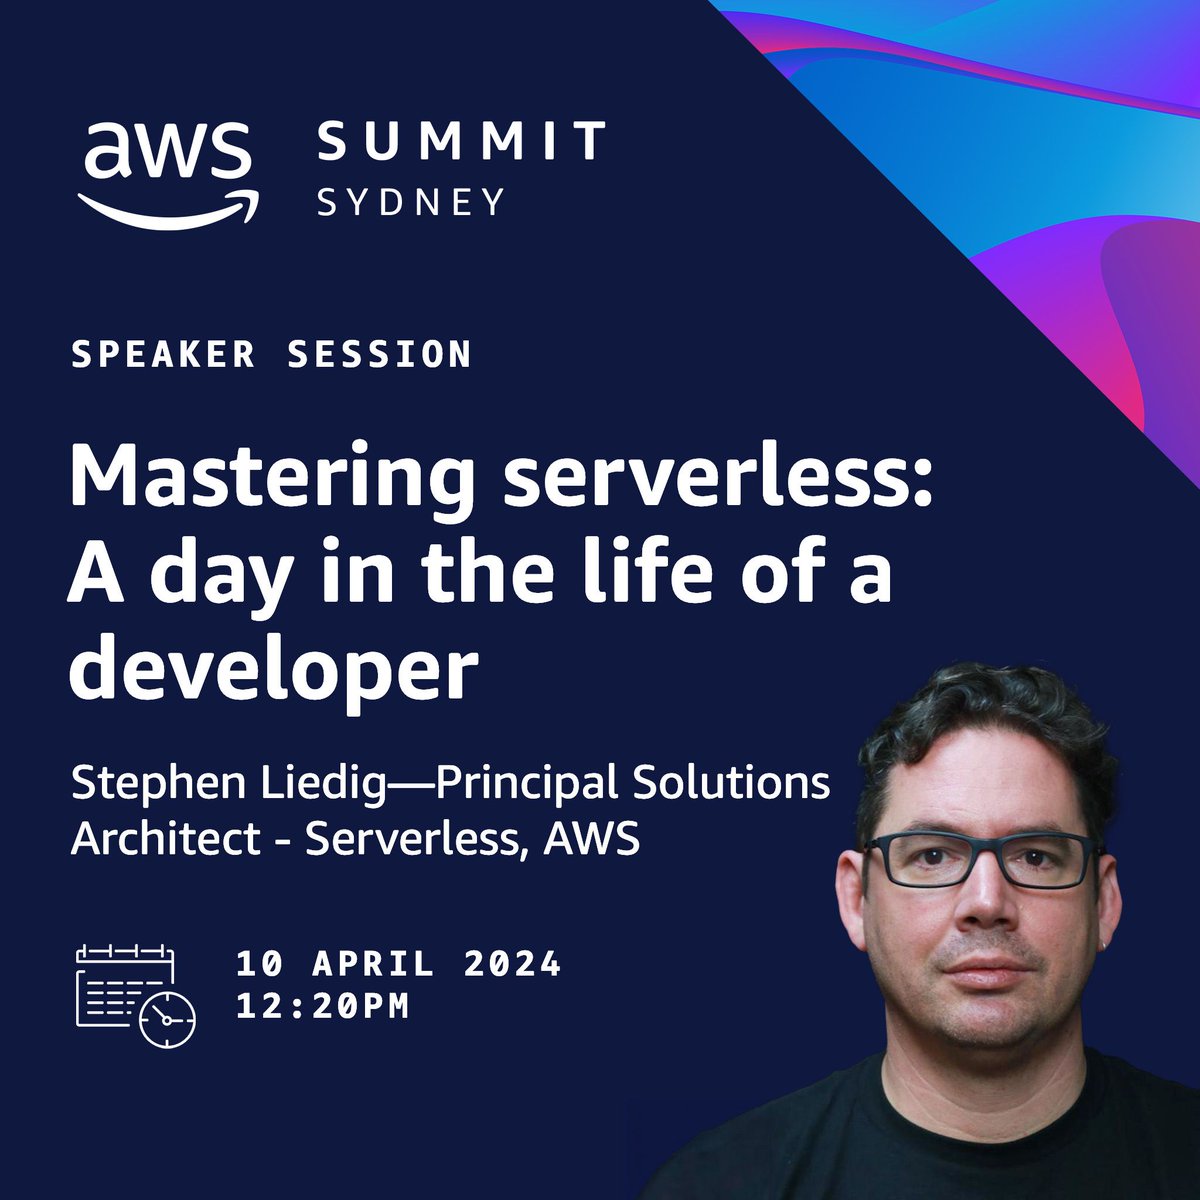 Excited to connect with all the #serverless fans at the upcoming @AWSCloudANZ Summit! Join me for a deep dive into key skills needed for success in creating serverless solutions. Don't forget to attend the hands-on Serverless Developer Experience workshop right after! #AWSSummit